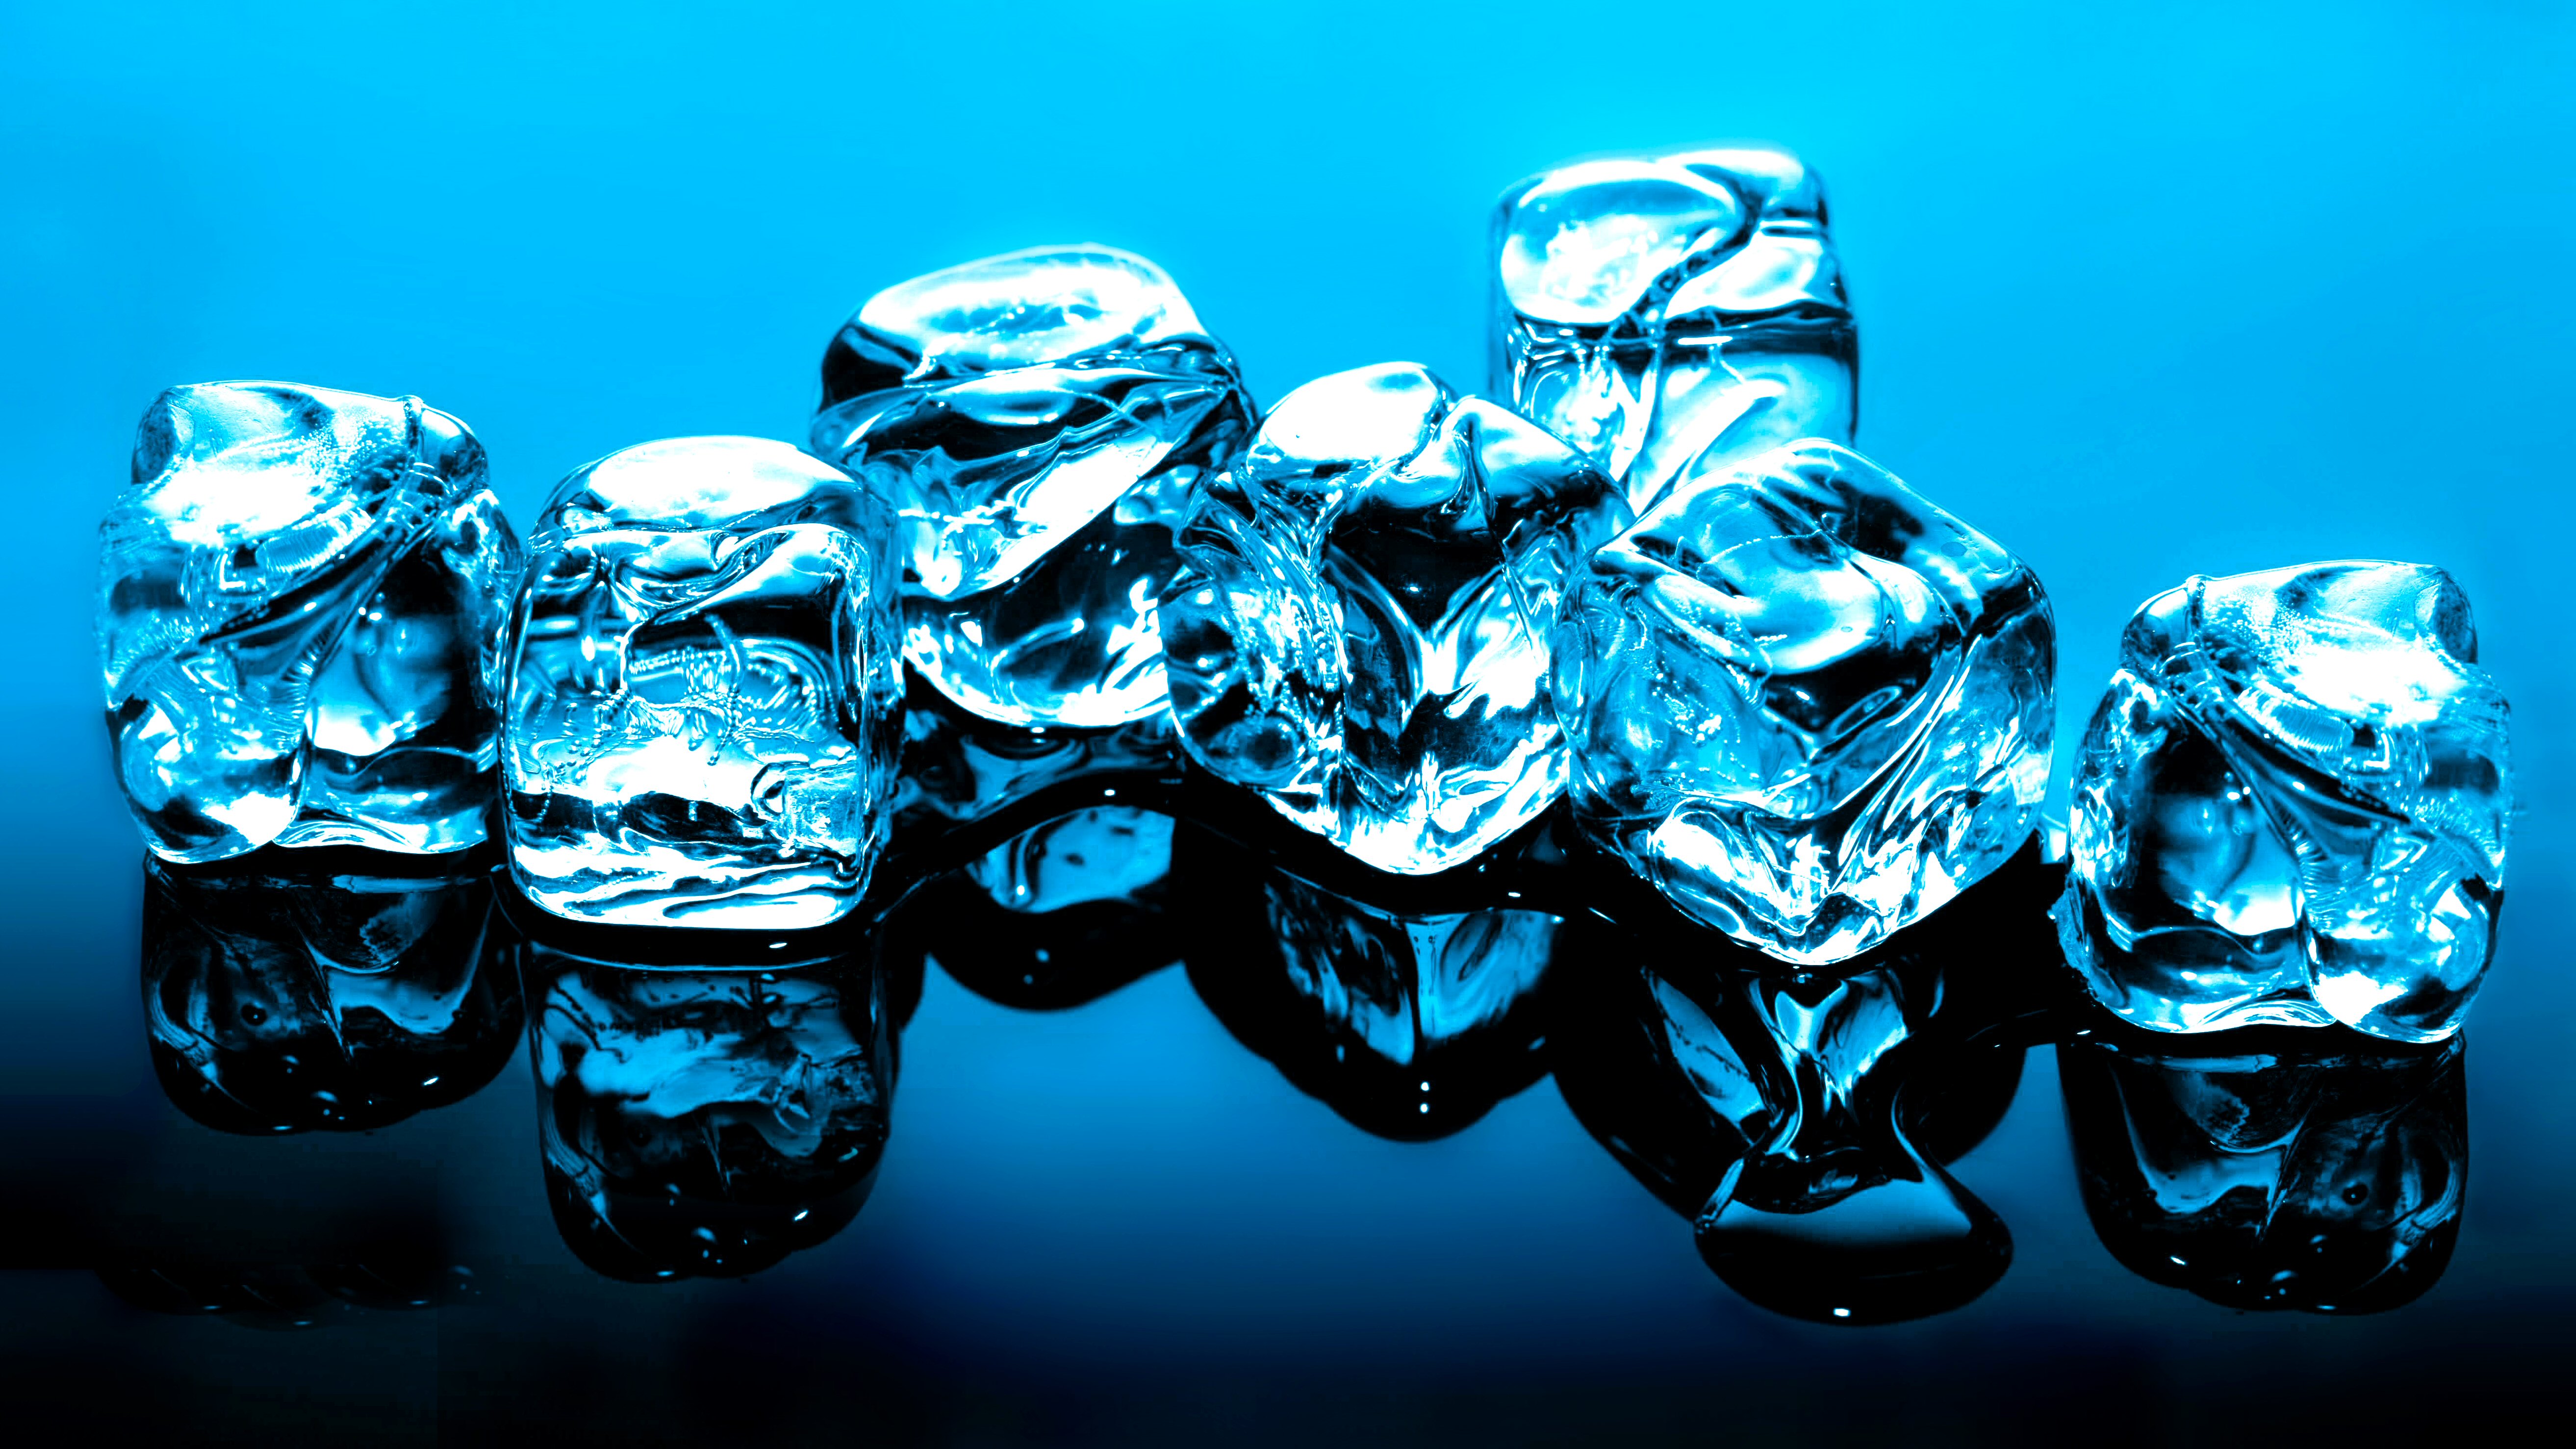 Free HD cube, photography, ice cube, blue